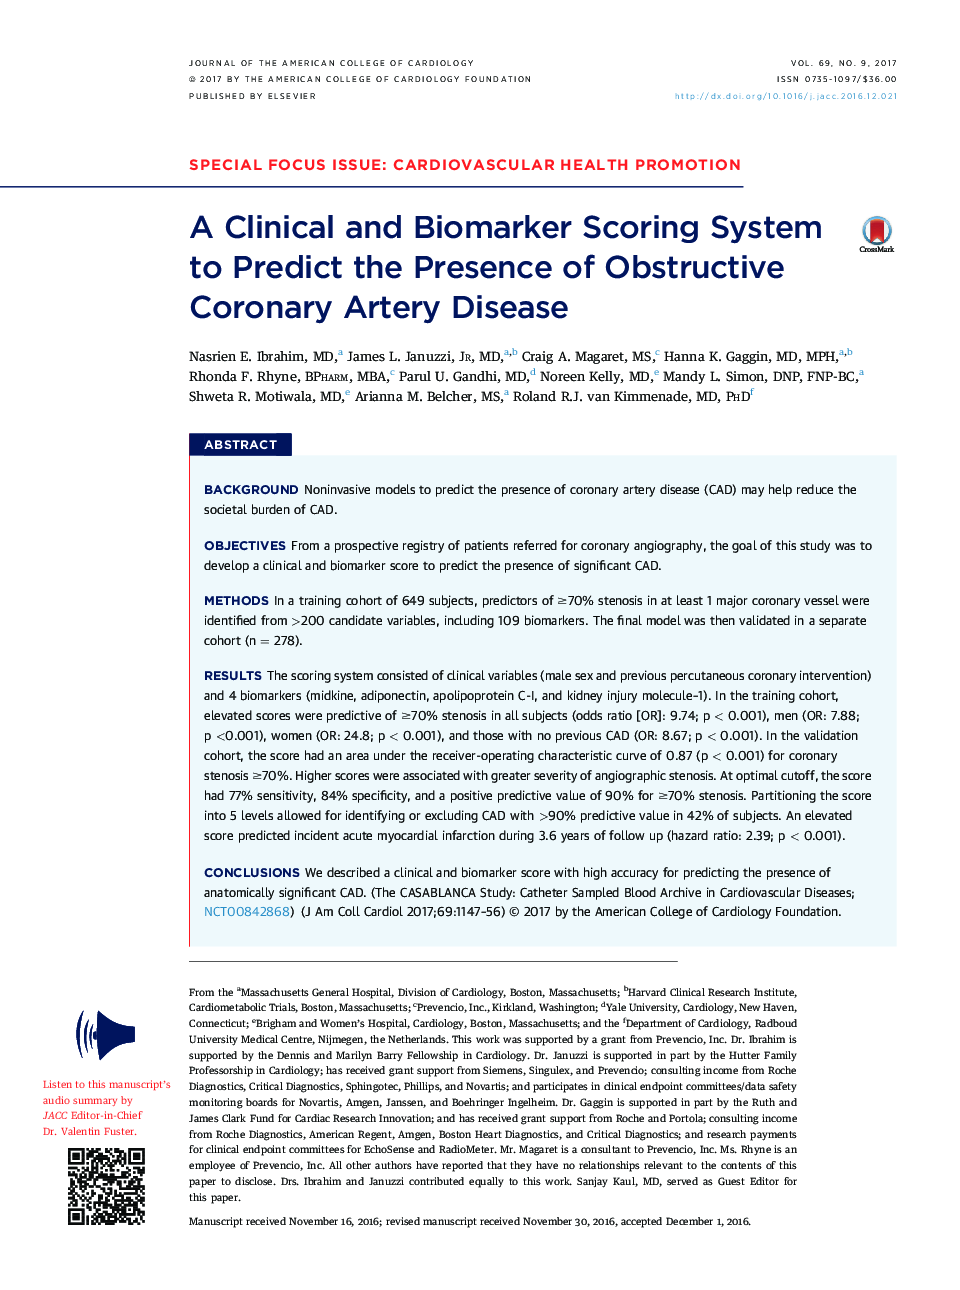 A Clinical and Biomarker Scoring System to Predict the Presence of Obstructive Coronary Artery Disease